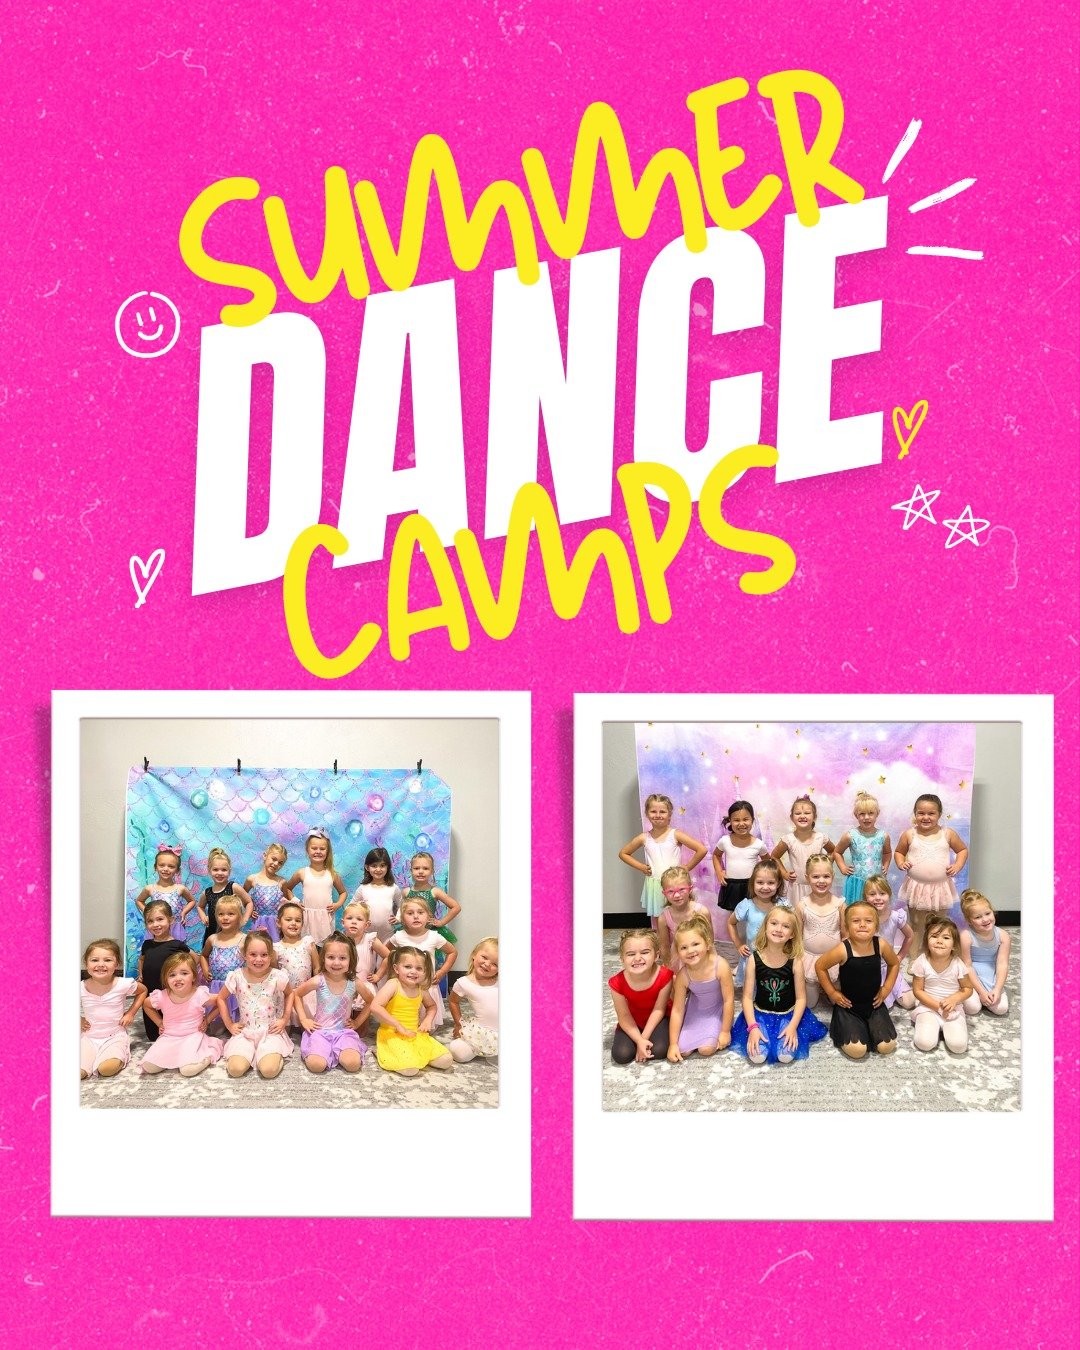 Add fun 3 days of fun to your summer!😎 Whether your child wants to see what dance is all about for the first time or they've danced with us all year - these camps are for them!💖 

💖 Ages 3-6
💖 9:00 - 11:00 AM
💖 Dance, snacks, and crafts!

Regist